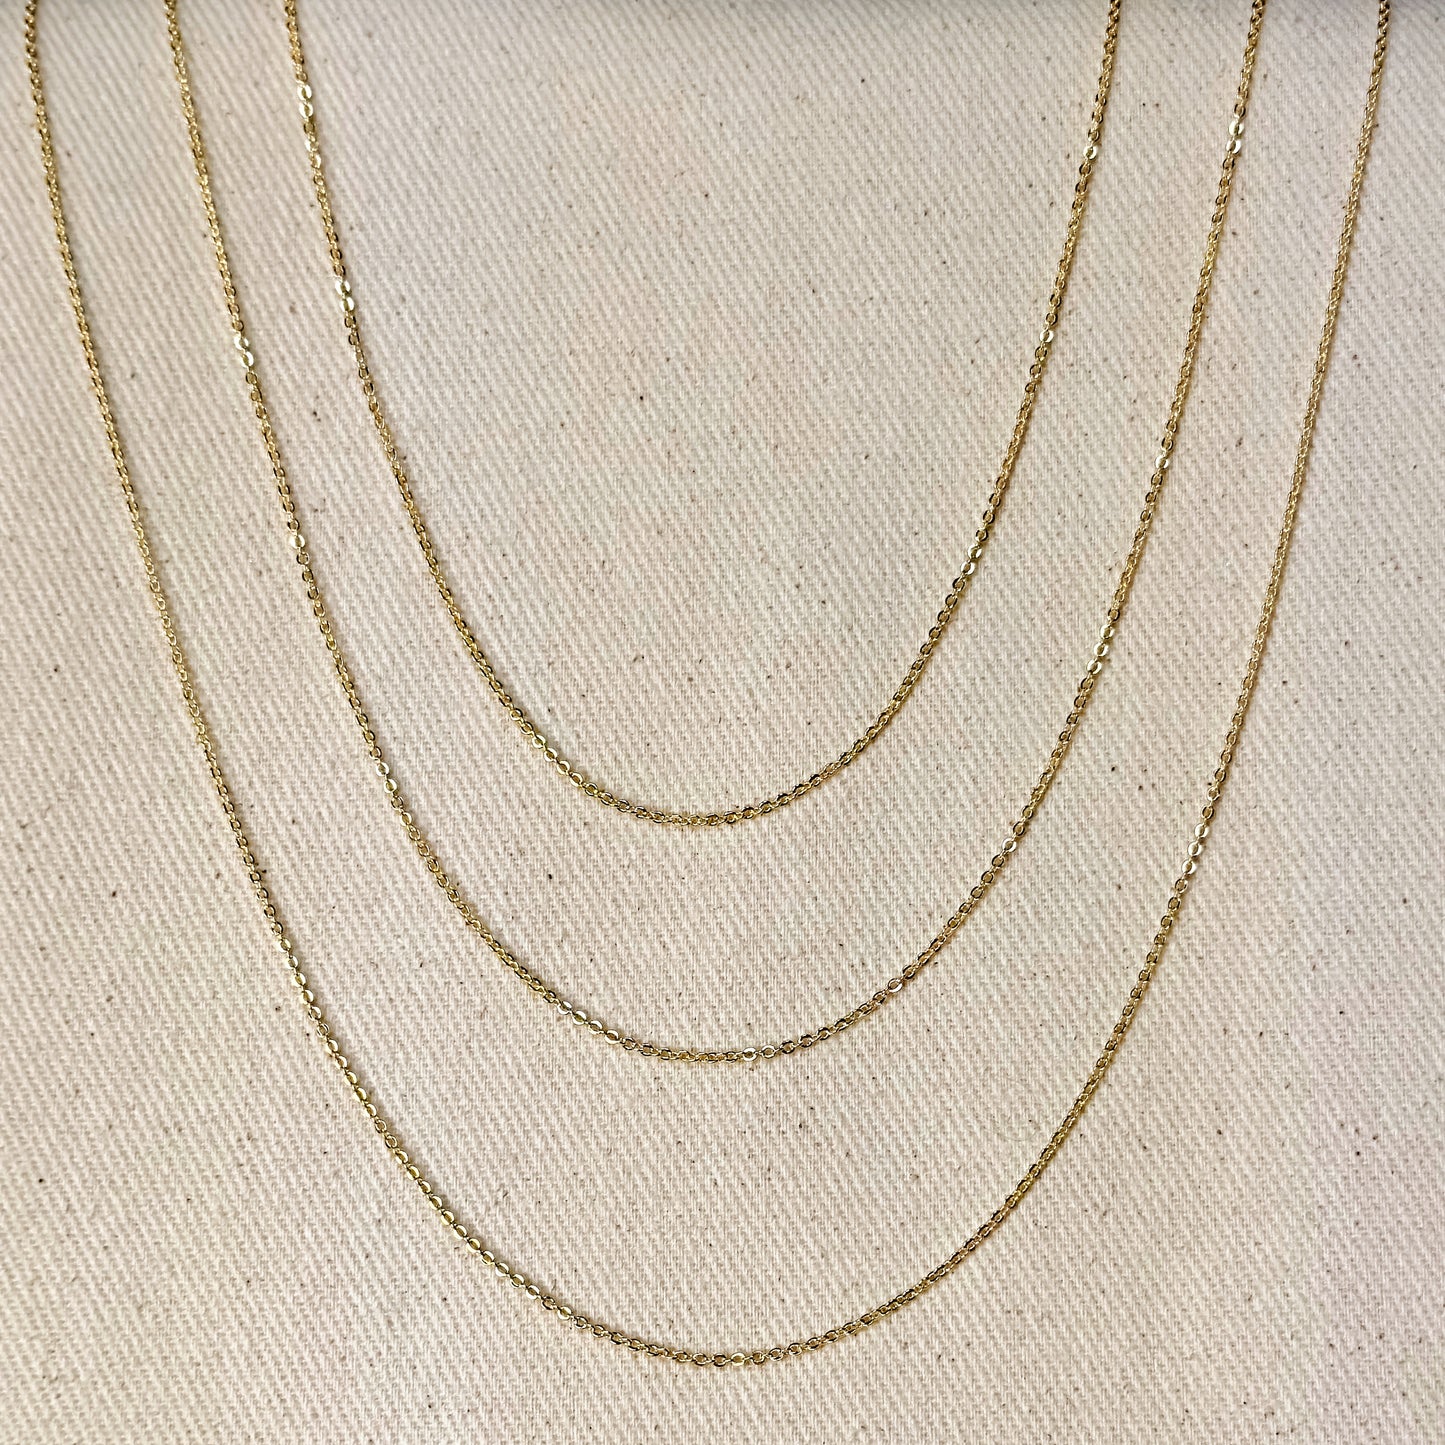 18k Gold Filled 1.45mm Cable Chain